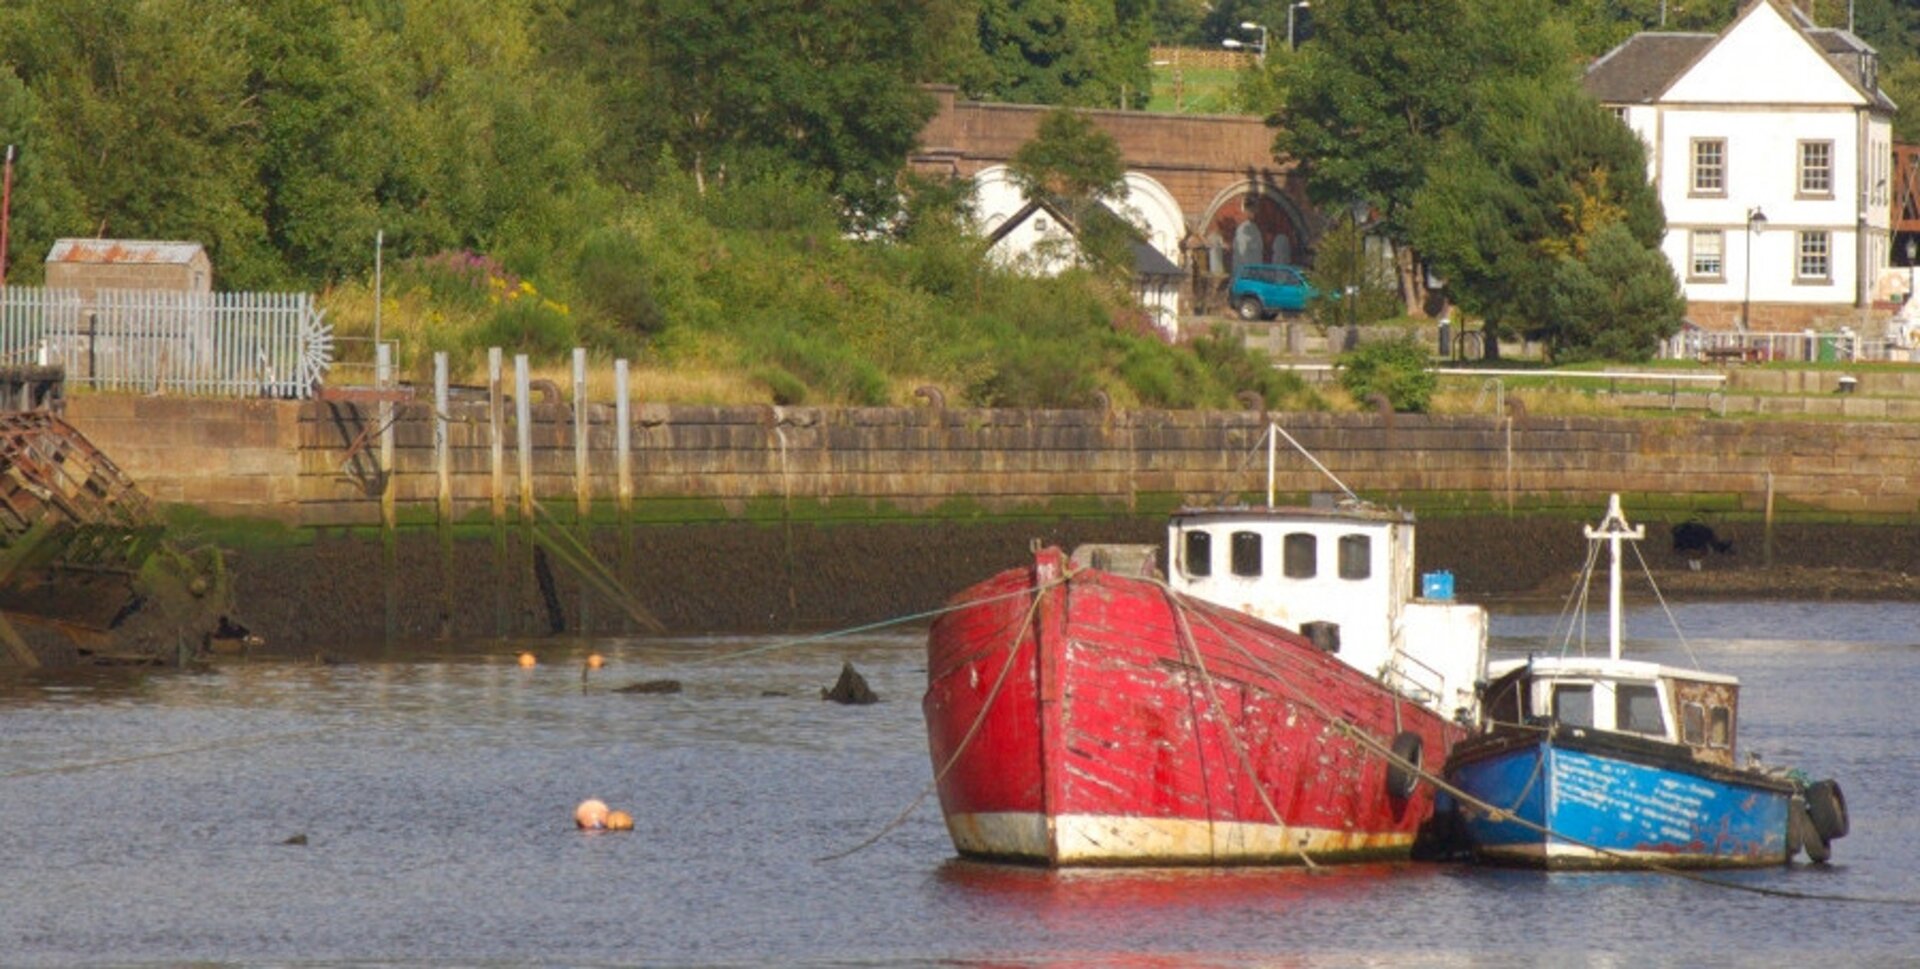 Turning the Tide On the Clyde will celebrate the river's history and communities